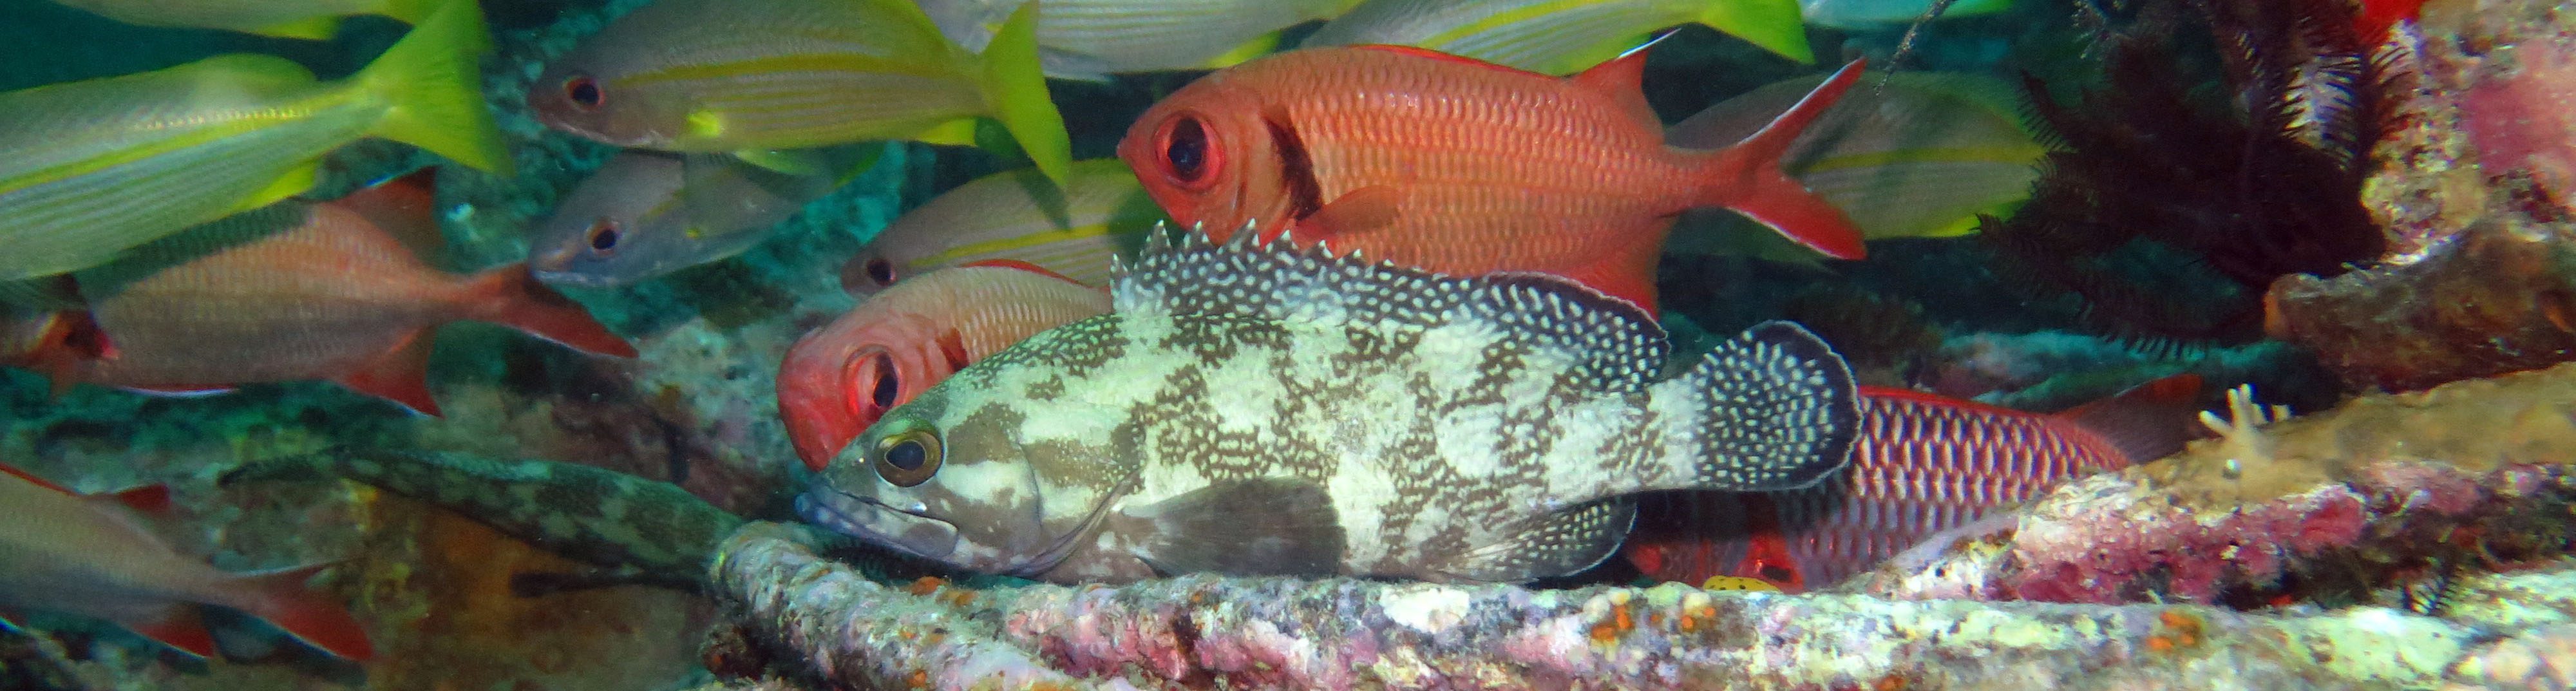 Speckle fin grouper with same soldiers at seaventures house reef diving mabul sabah malaysia